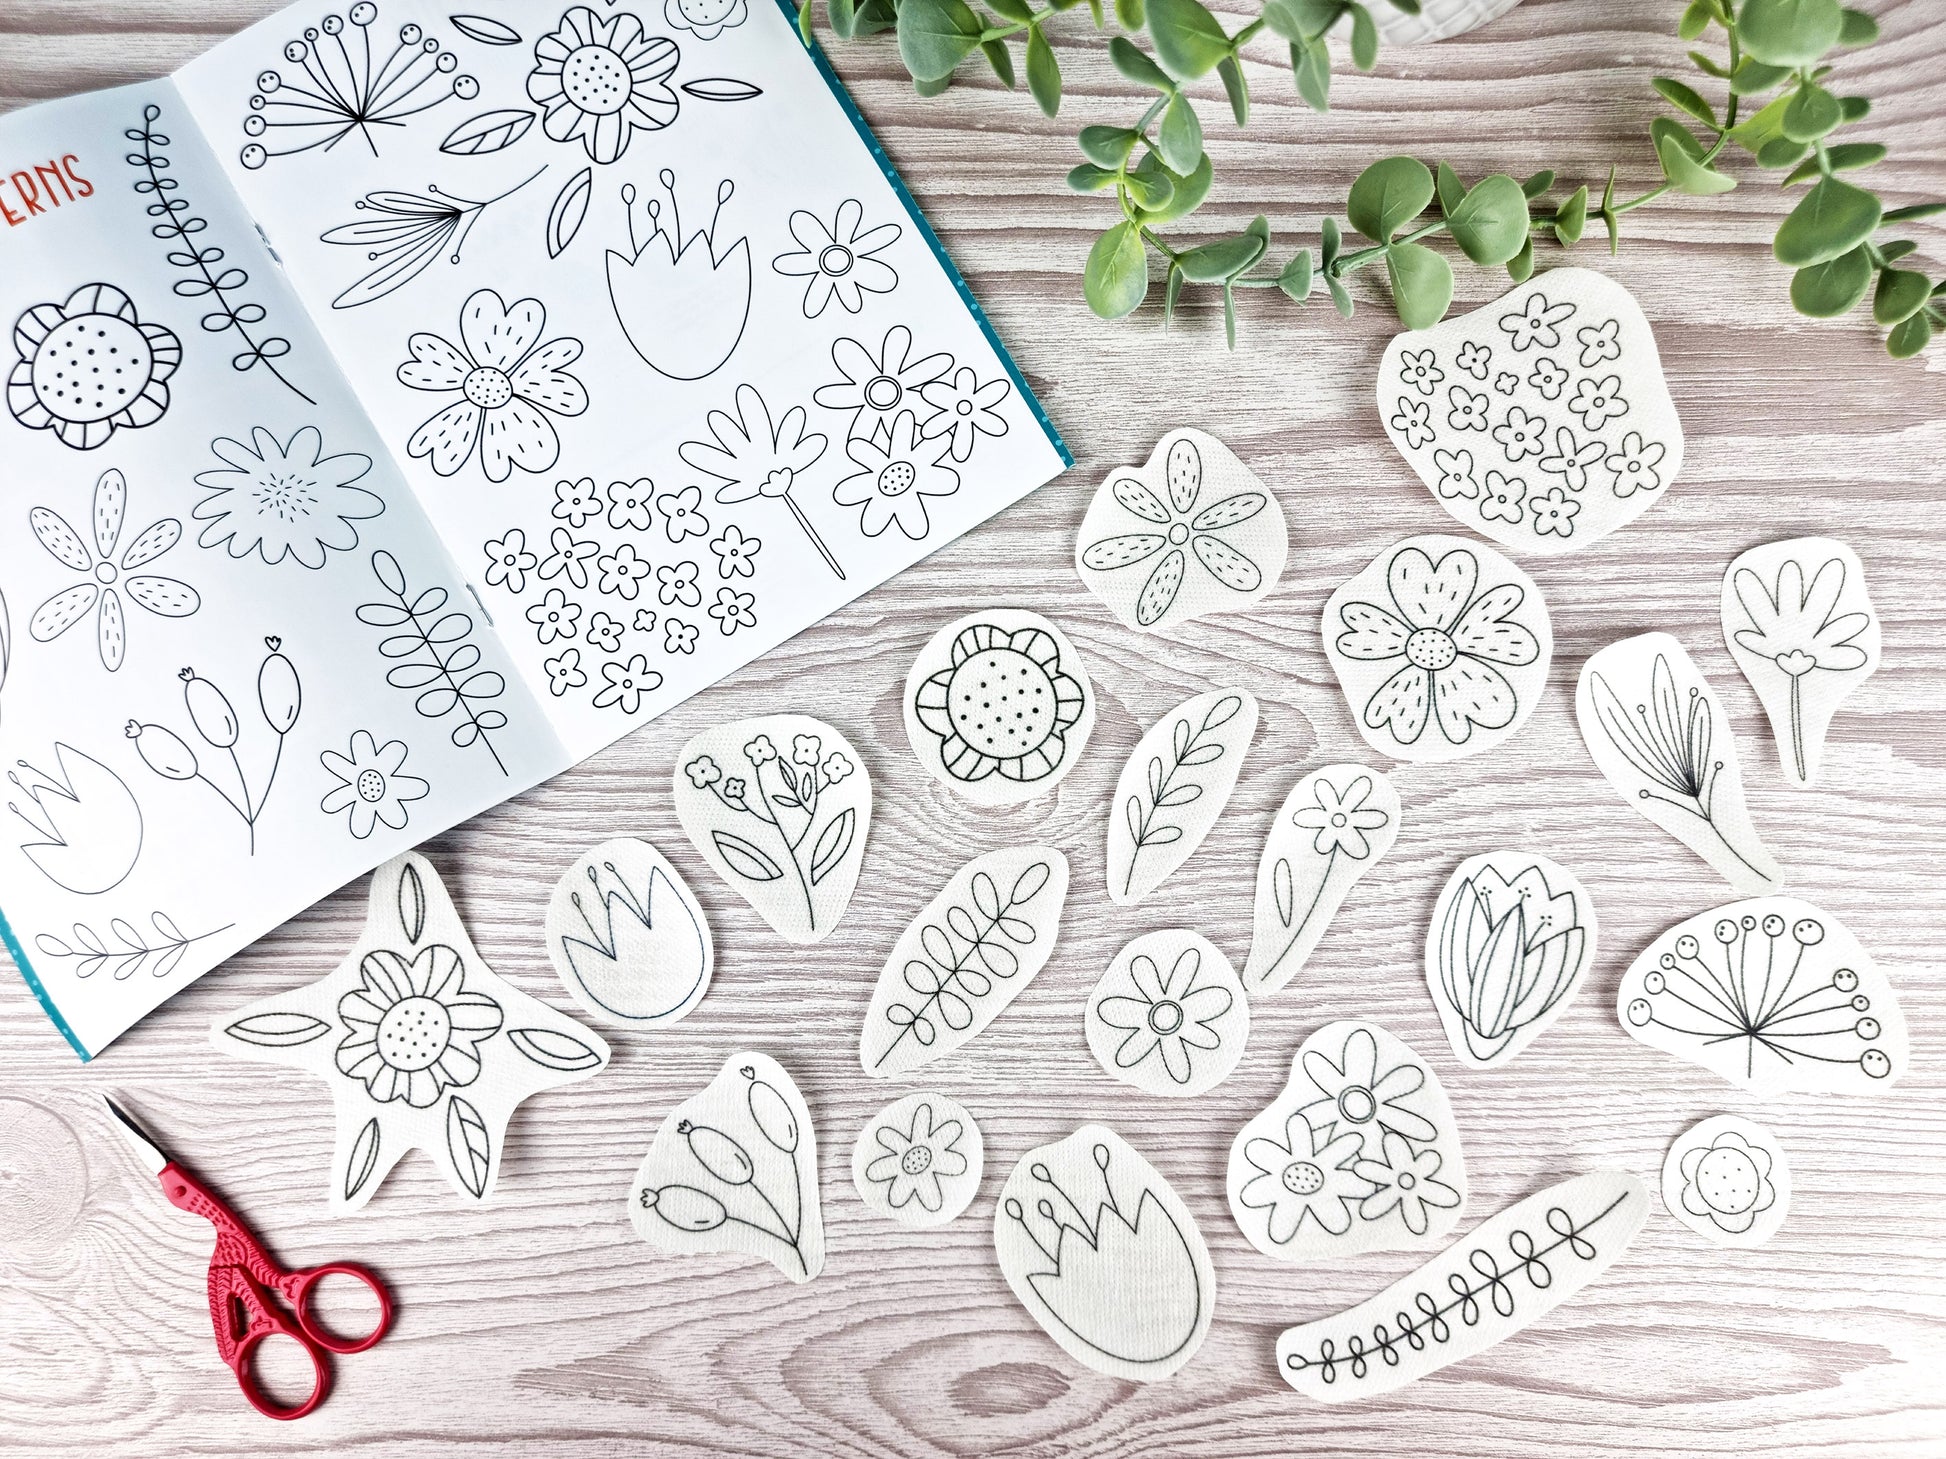 Floral Doodles Stick and Stitch Embroidery Patterns -  - ohsewbootiful